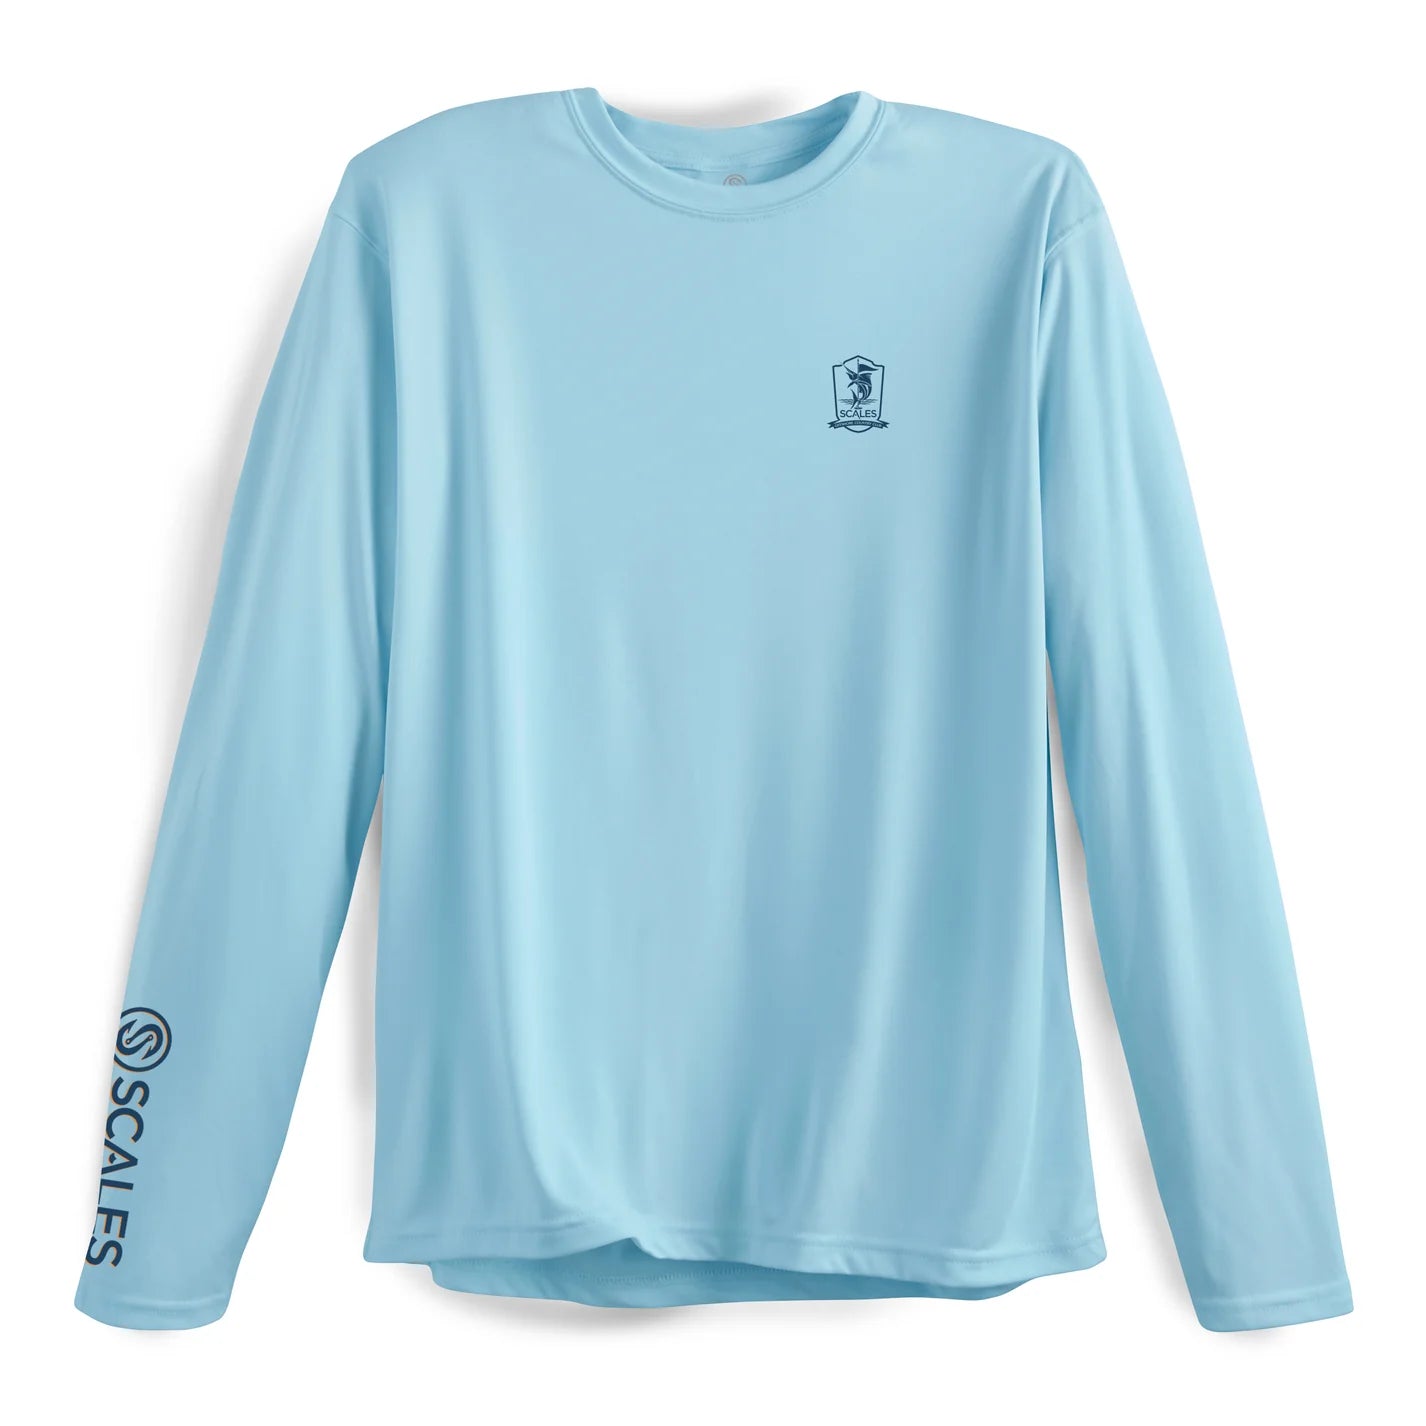 Scales Sporty Club L/S Performance - Light Blue